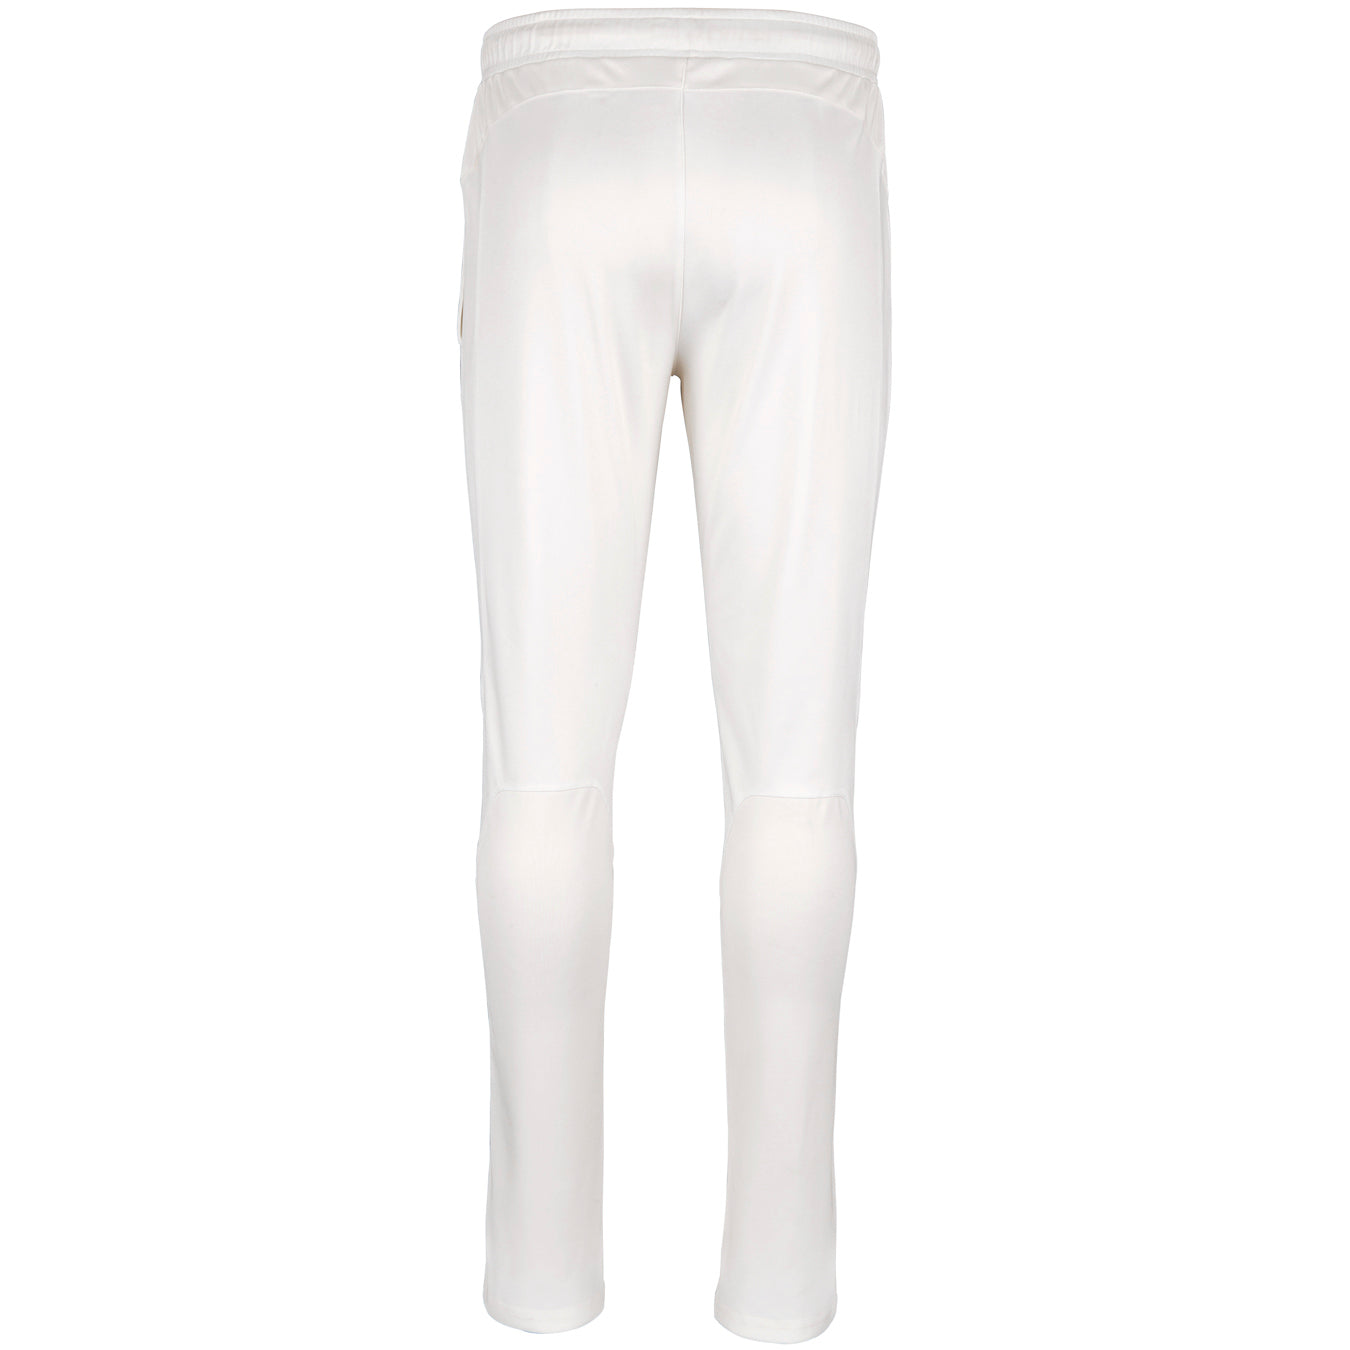 Velocity Track Trousers Mens  GrayNicolls  Free Shipping Loyalty Points